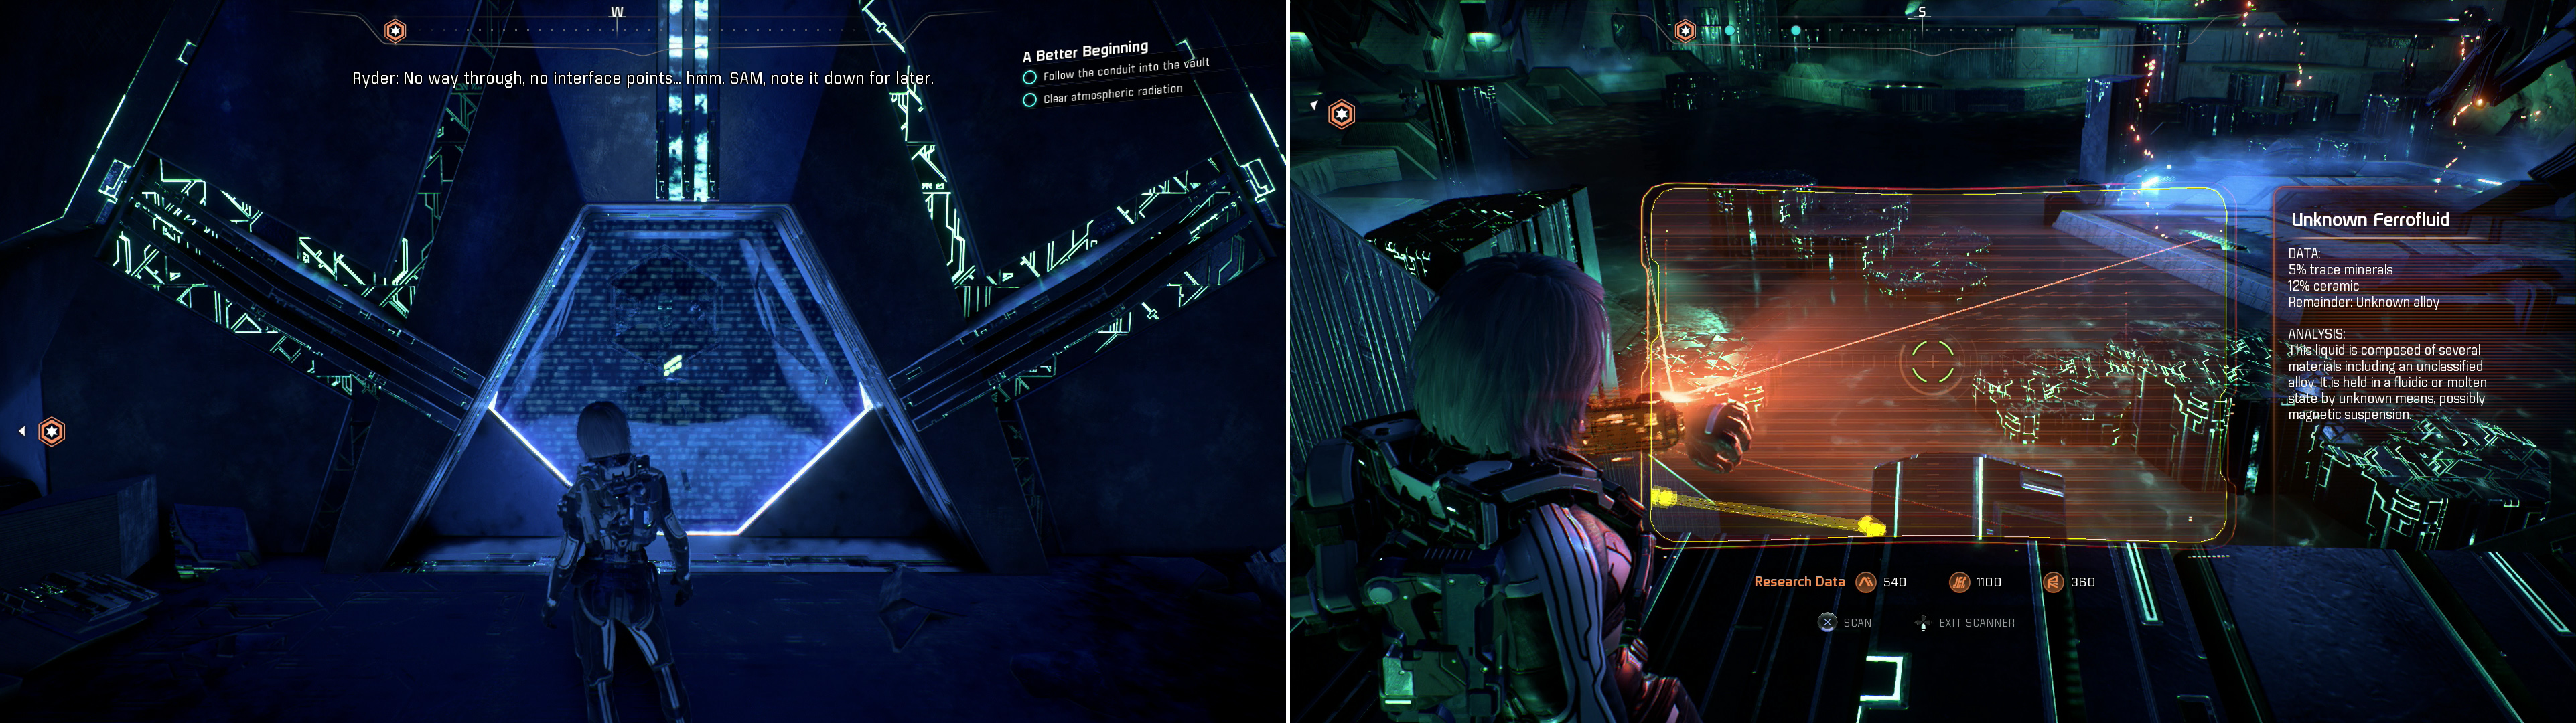 Note an energy barrier, behind which loot hides (left) which youll need to return to later. All you need to know about the Unknown Ferrofluid in the vault is that you dont want to fall into it (right).